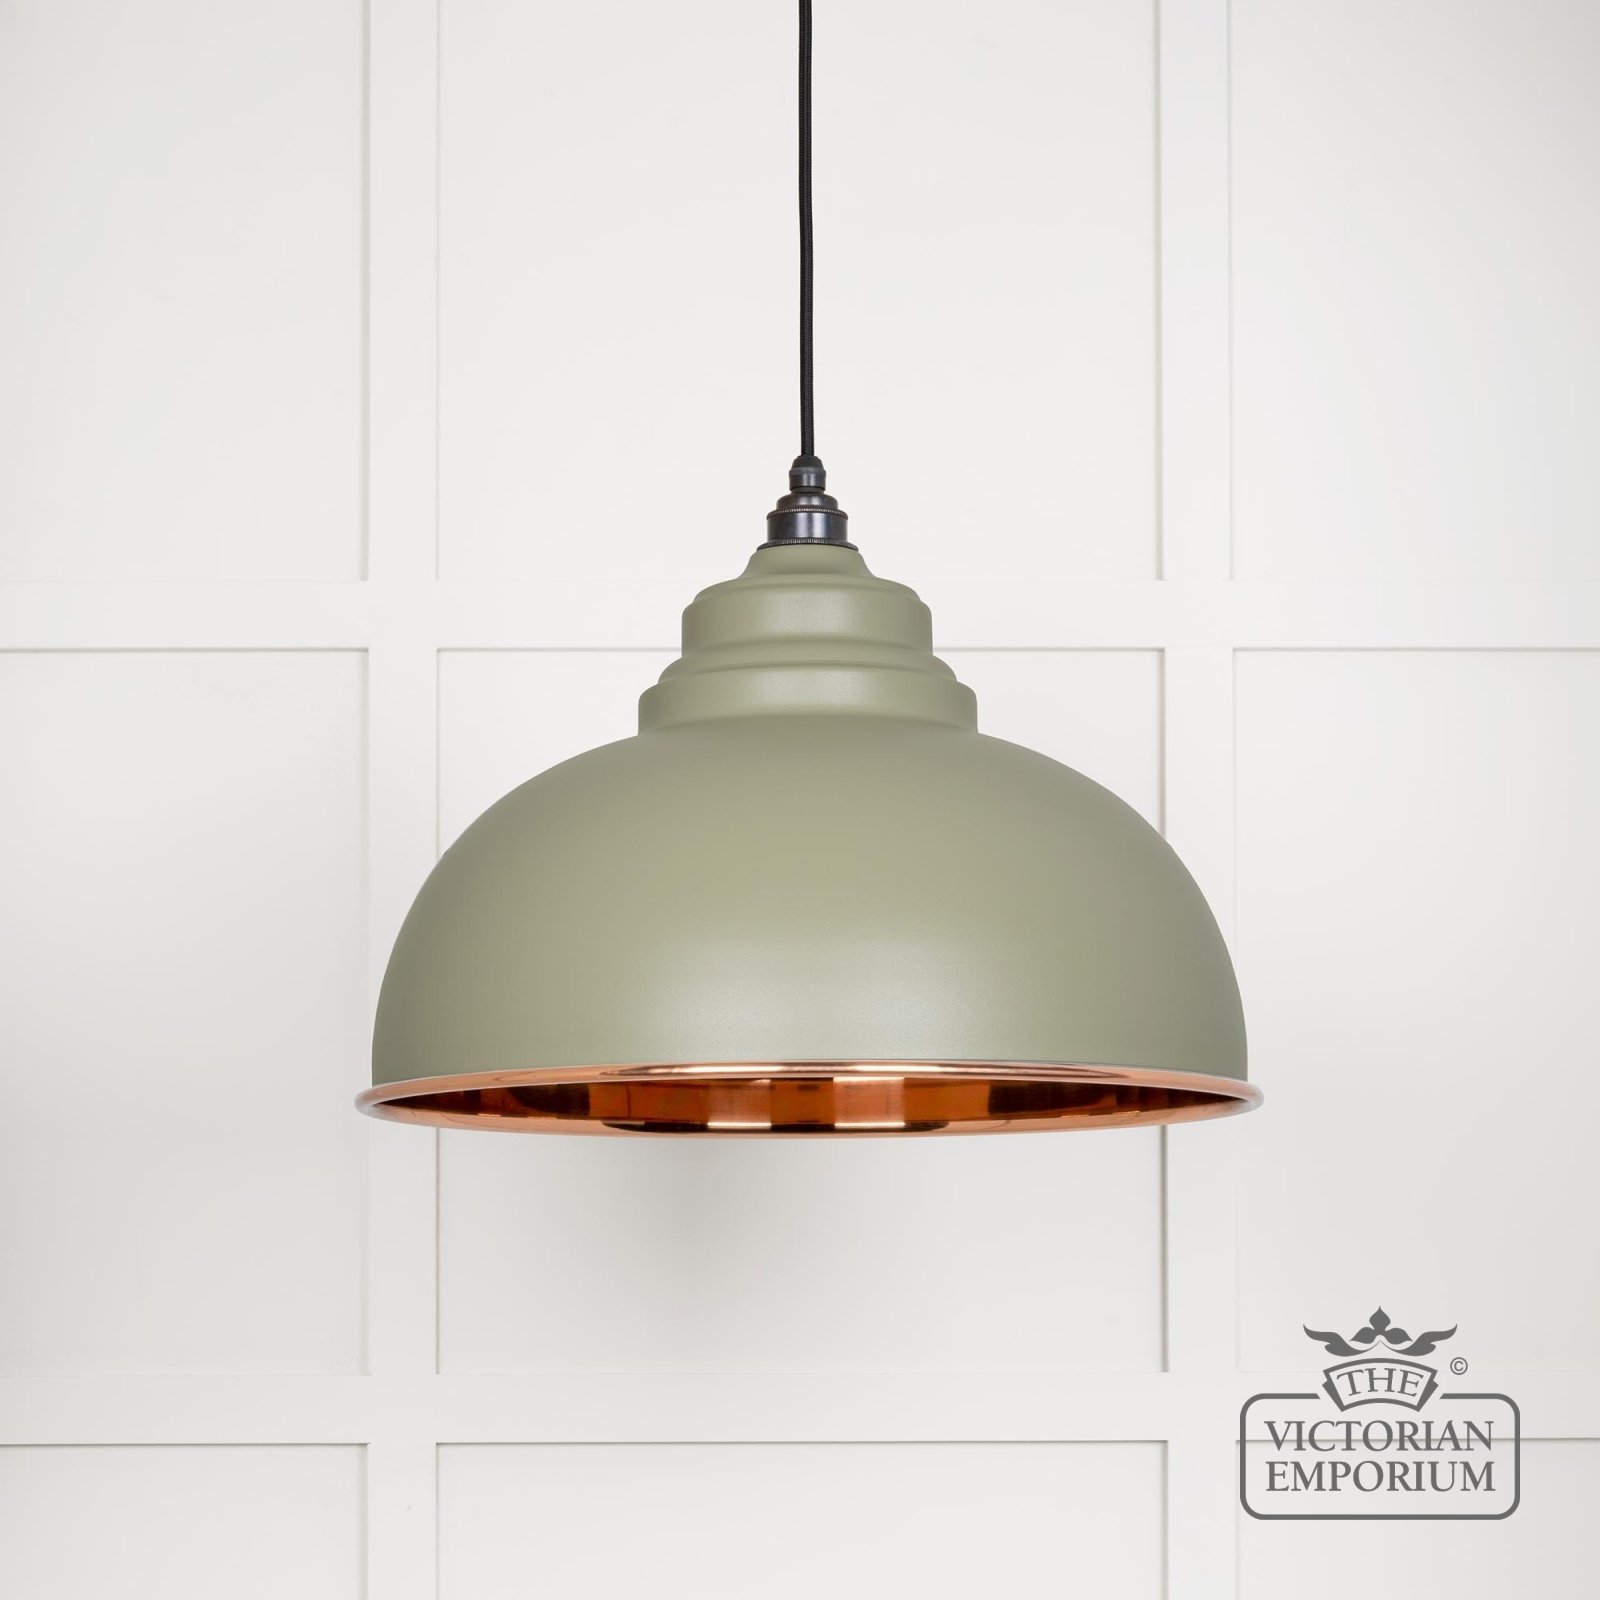 Harlow Pendant Light in Smooth Copper with Tump Exterior